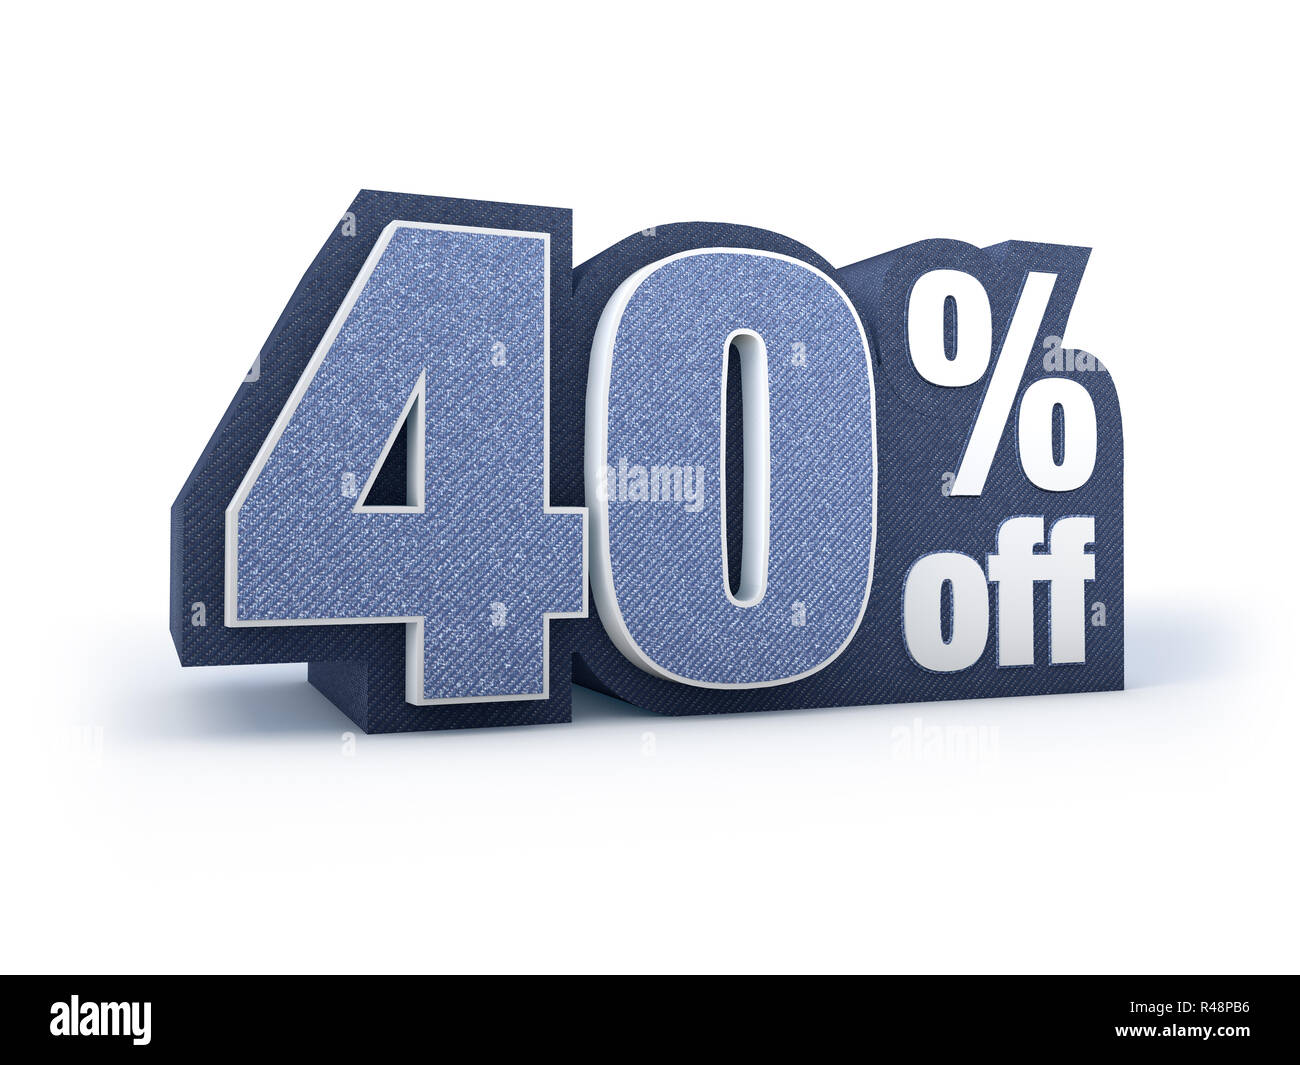 40 percent off denim styled discount price sign Stock Photo